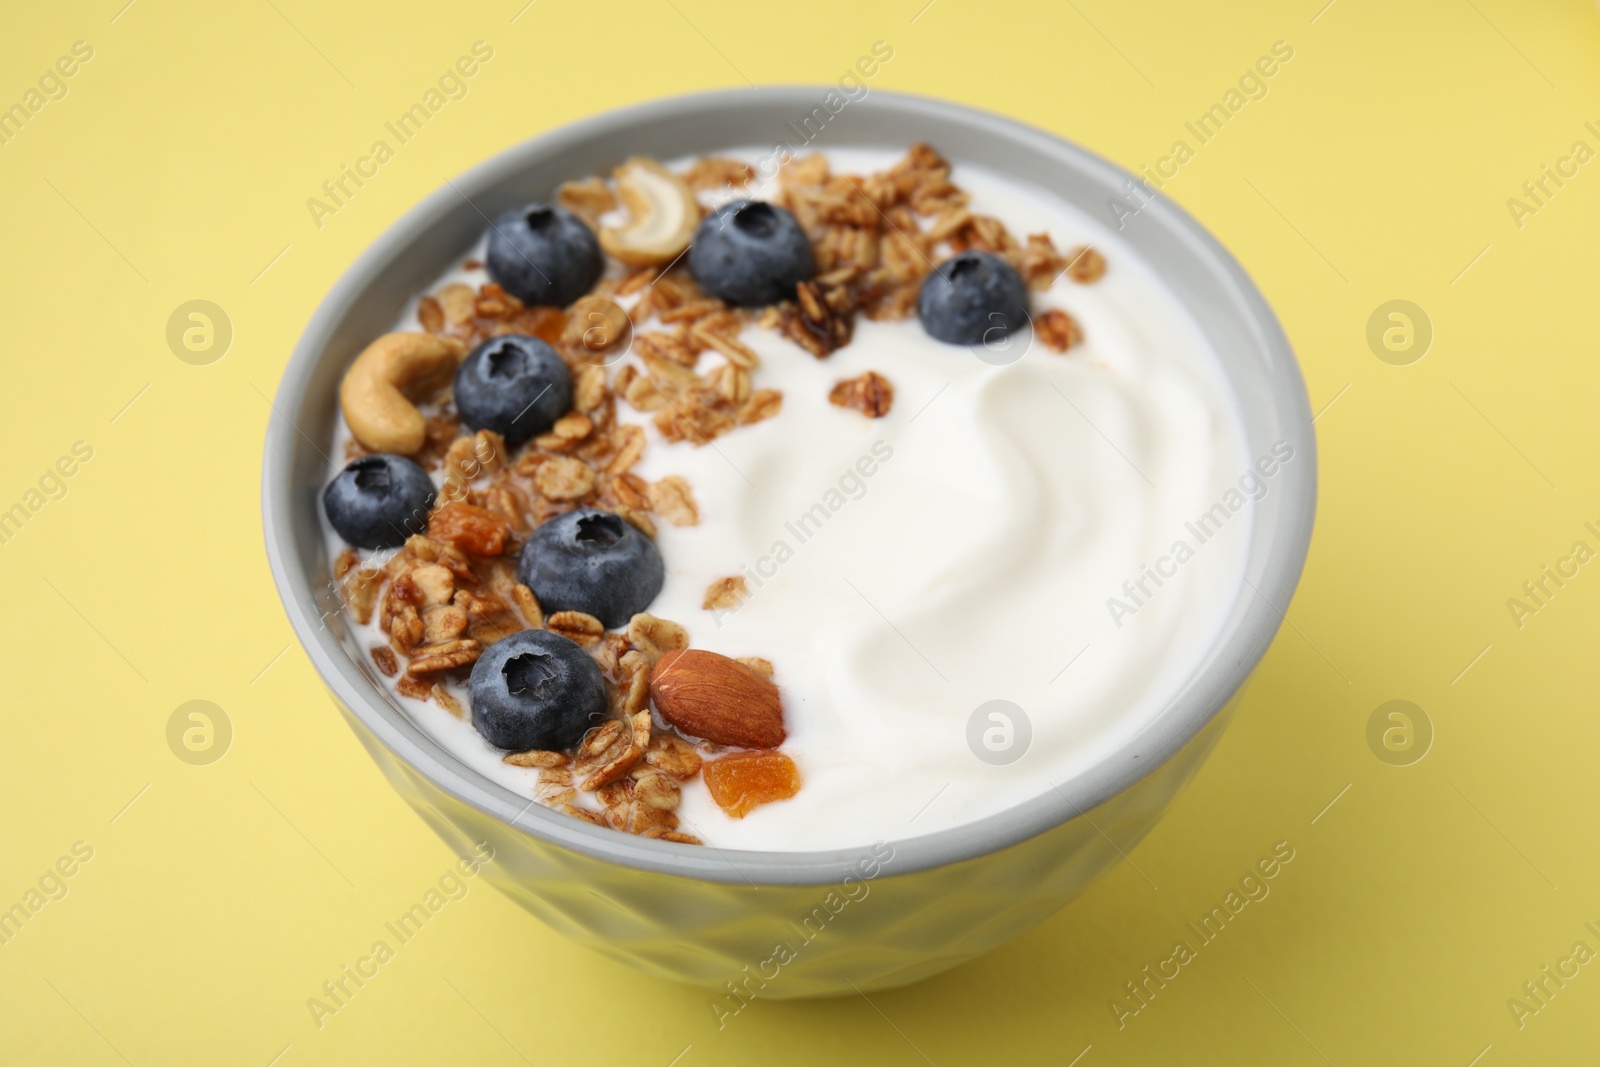 Photo of Bowl with yogurt, blueberries and granola on yellow background, closeup